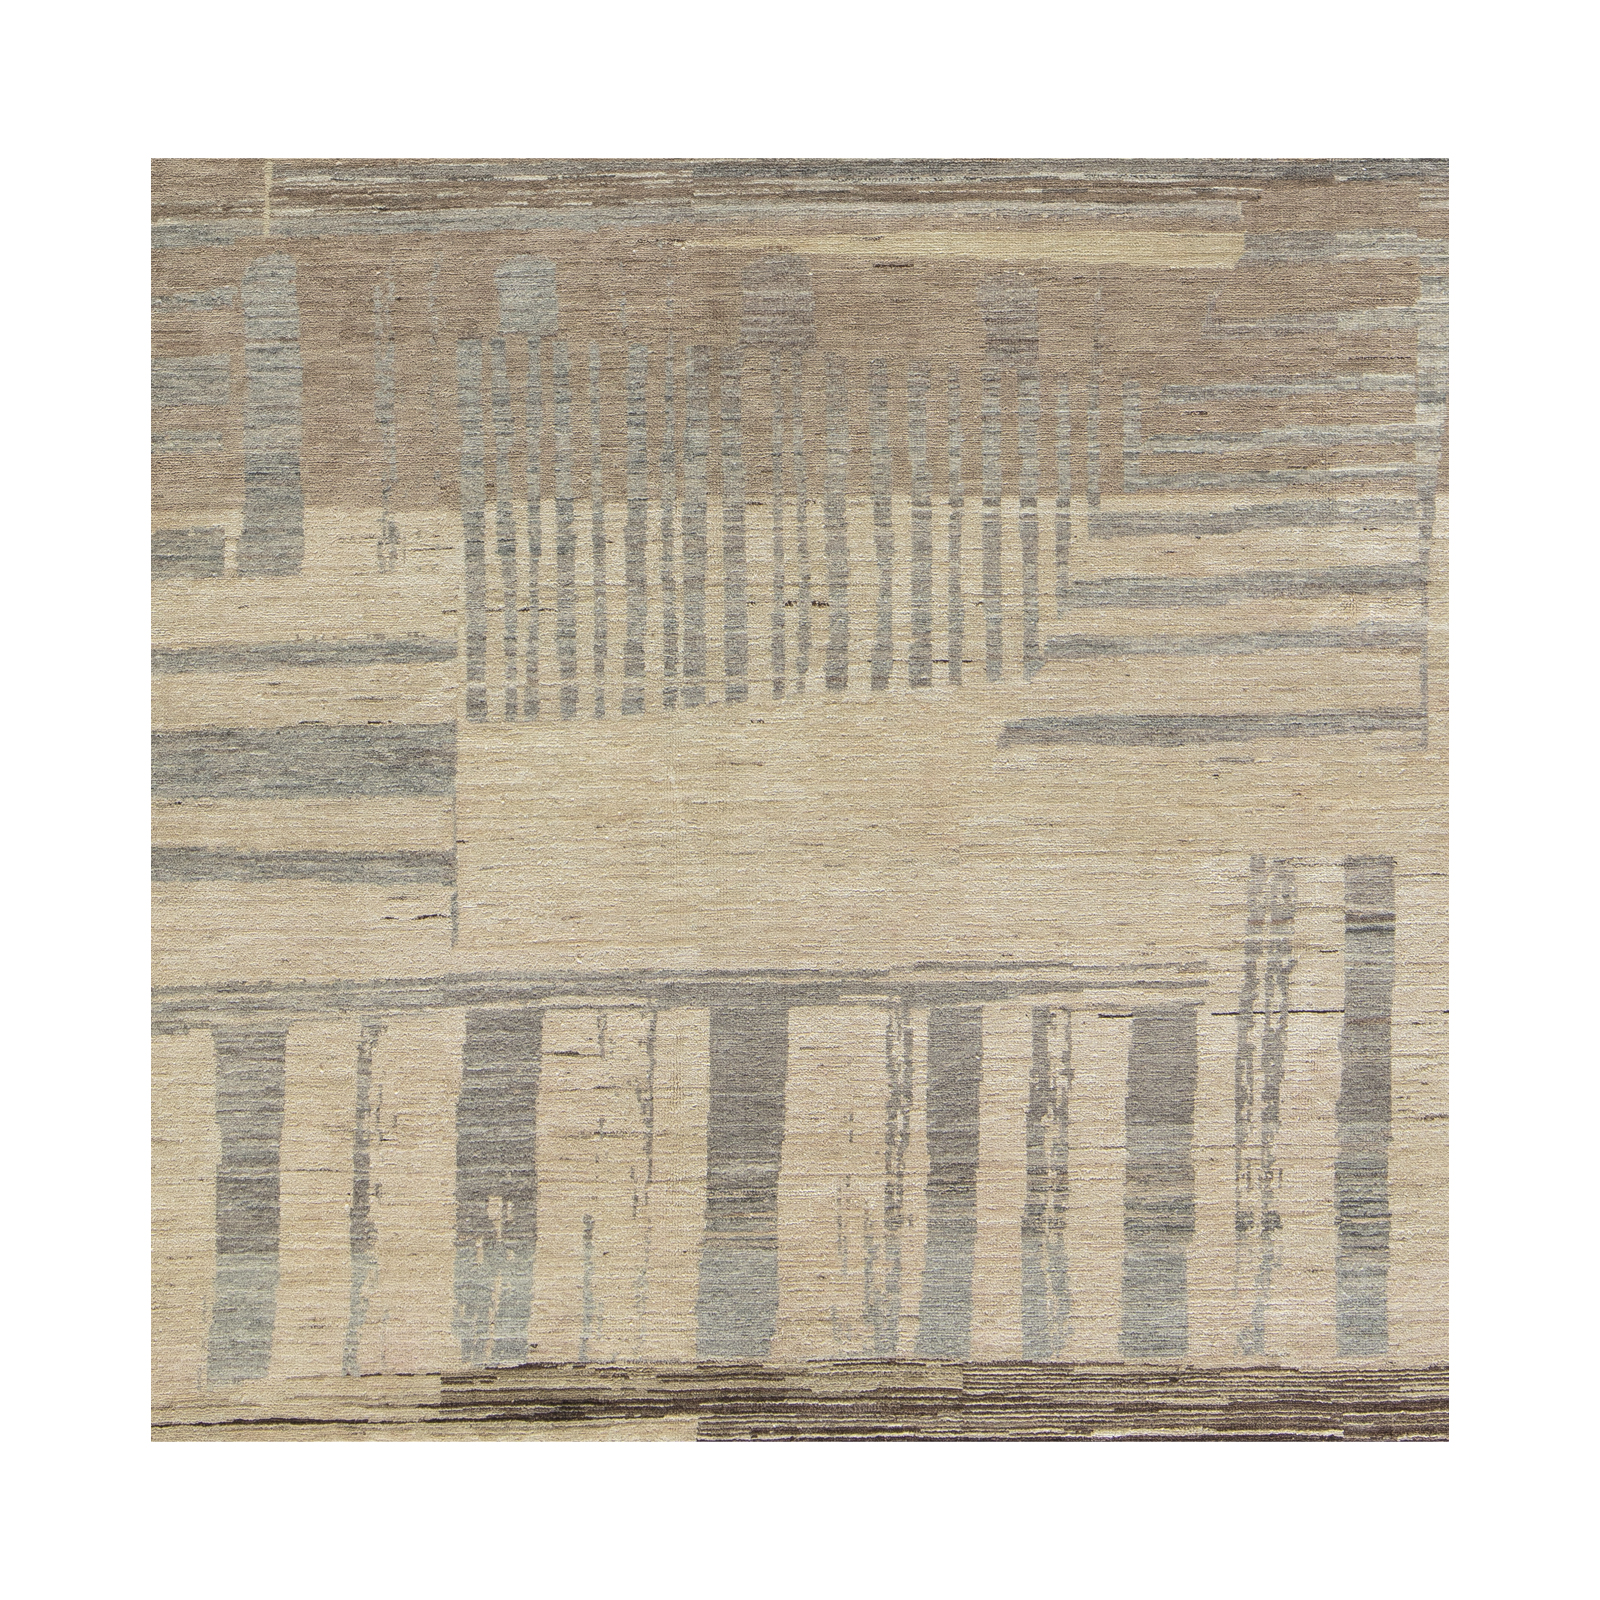 Our Sahara rug is hand-knotted, and made from the finest hand-carded, hand-spun naturally dyed wool.